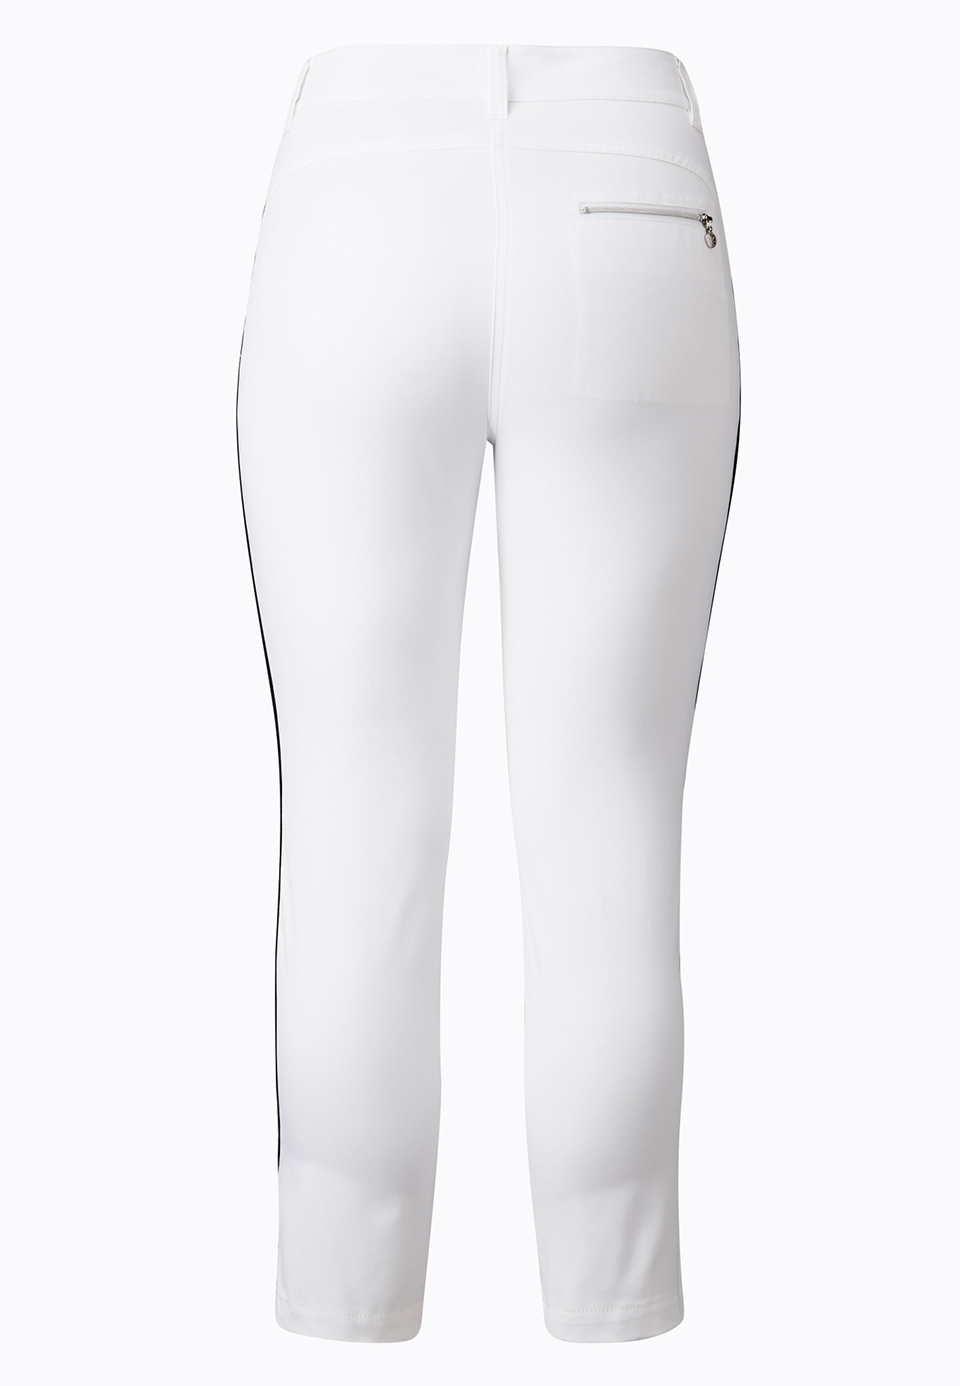 DAILY SPORTS Damen GLAM ANKLE 7/8 PANTS 243/287 weiss